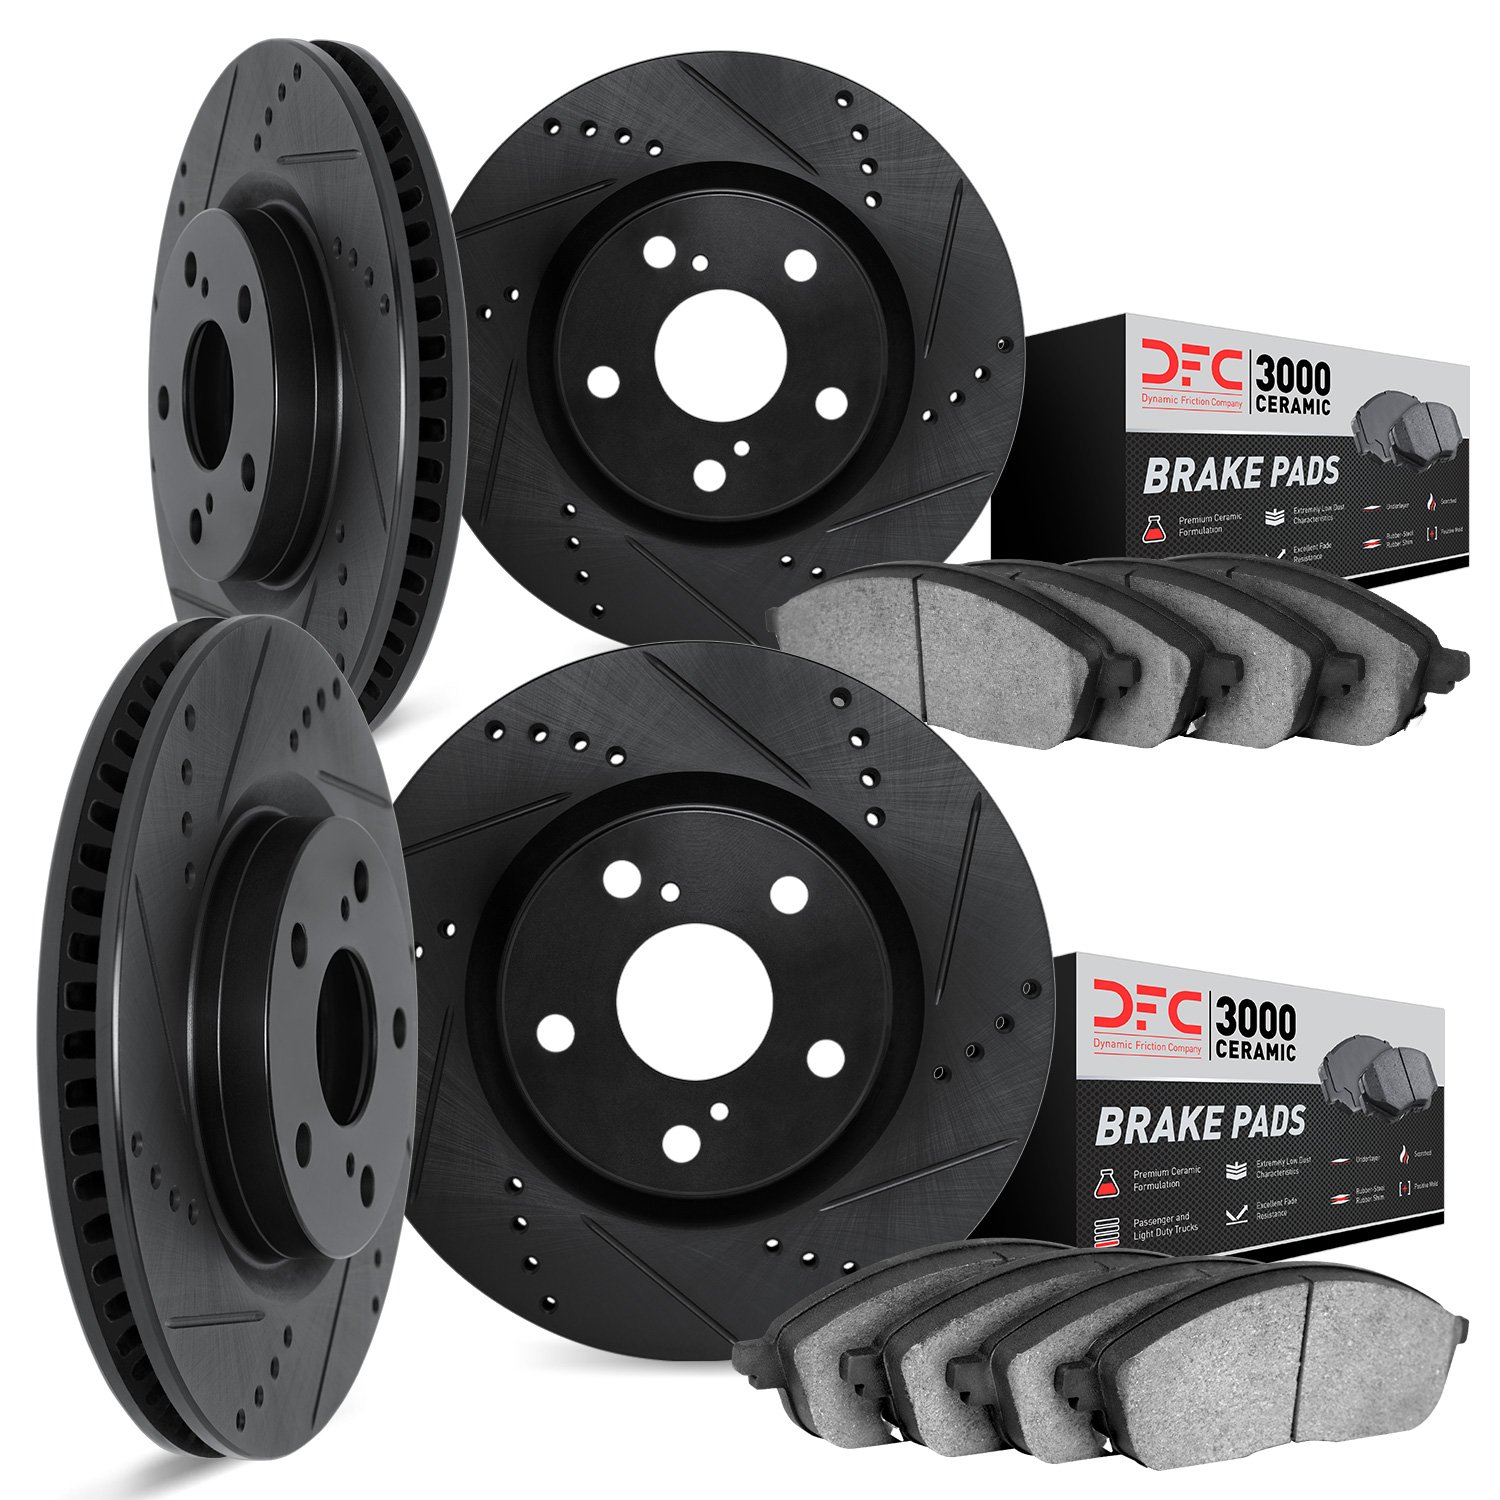 8304-63106 Drilled/Slotted Brake Rotors with 3000-Series Ceramic Brake Pads Kit [Black], 2006-2012 Mercedes-Benz, Position: Fron